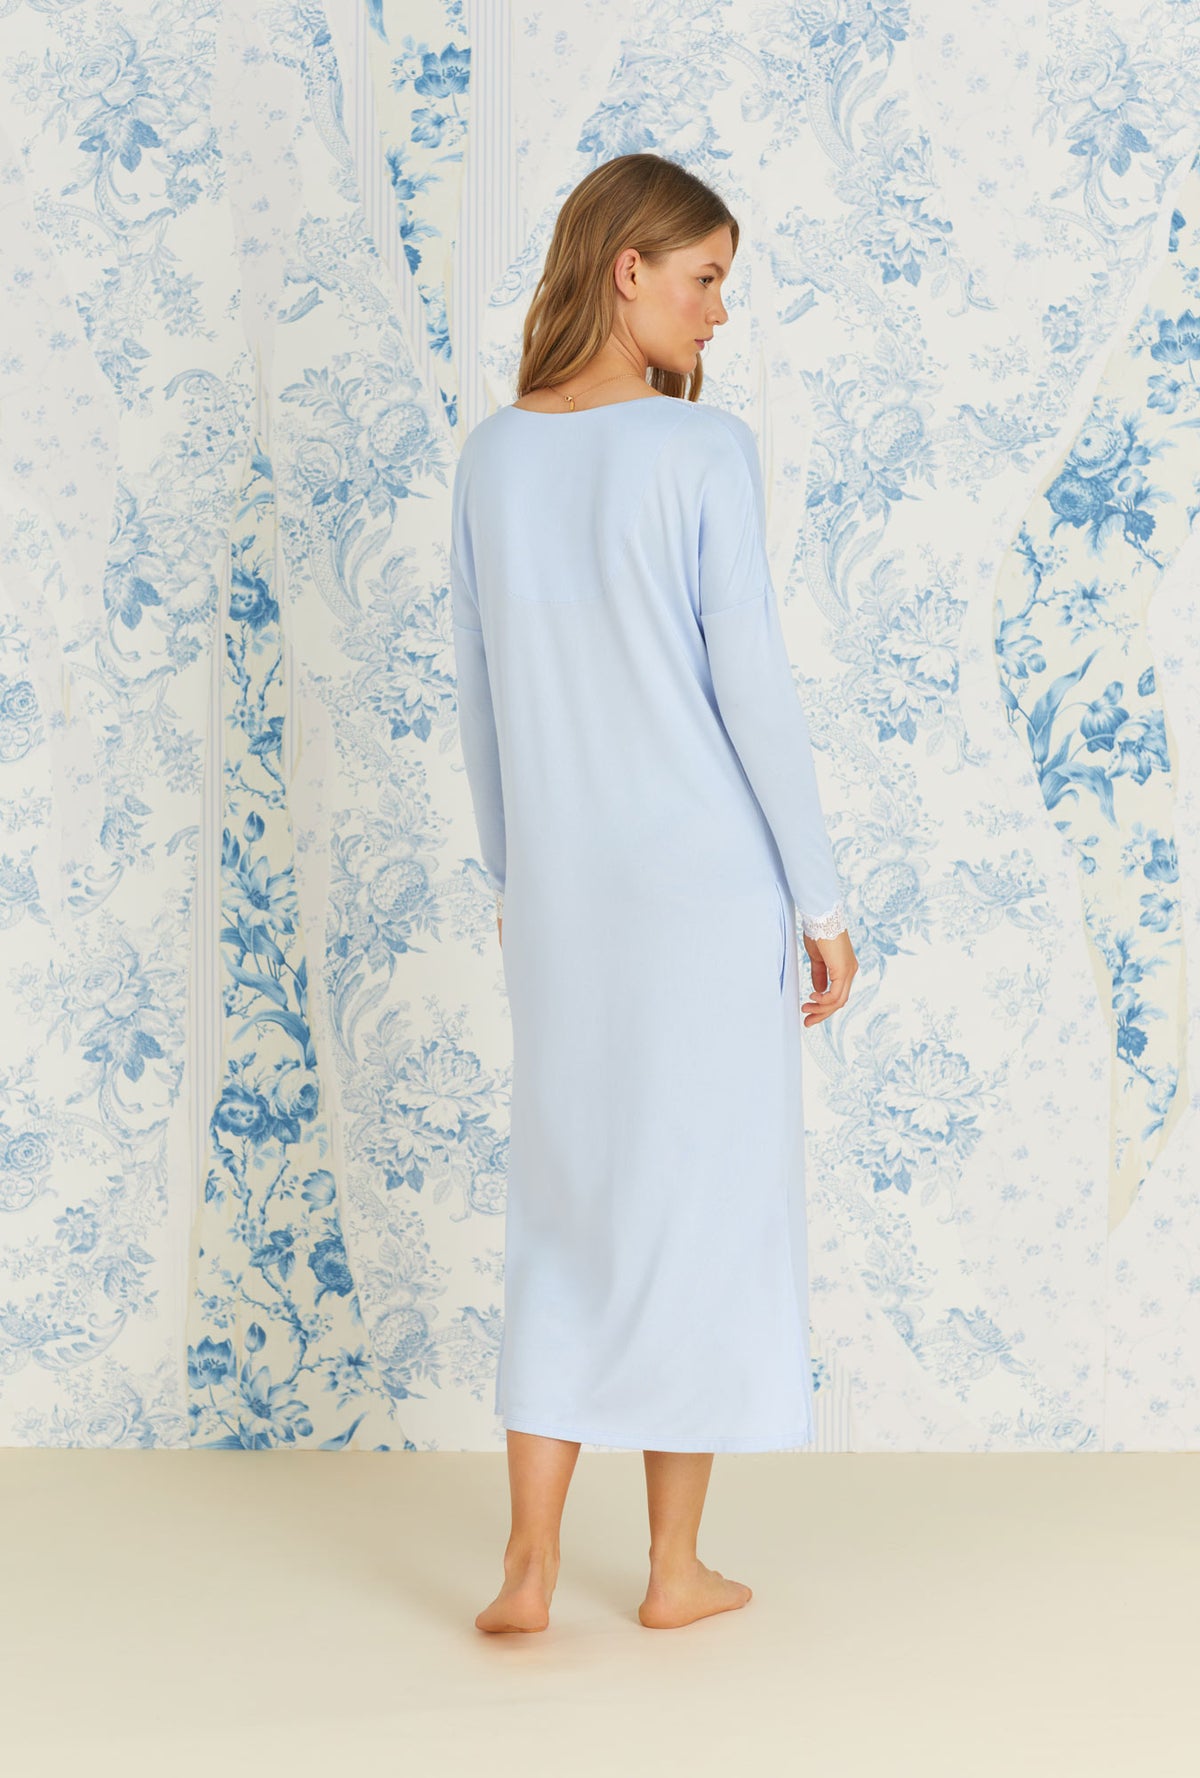 A lady wearing long sleeve blue cozy sweater knit long lounger nightgown.